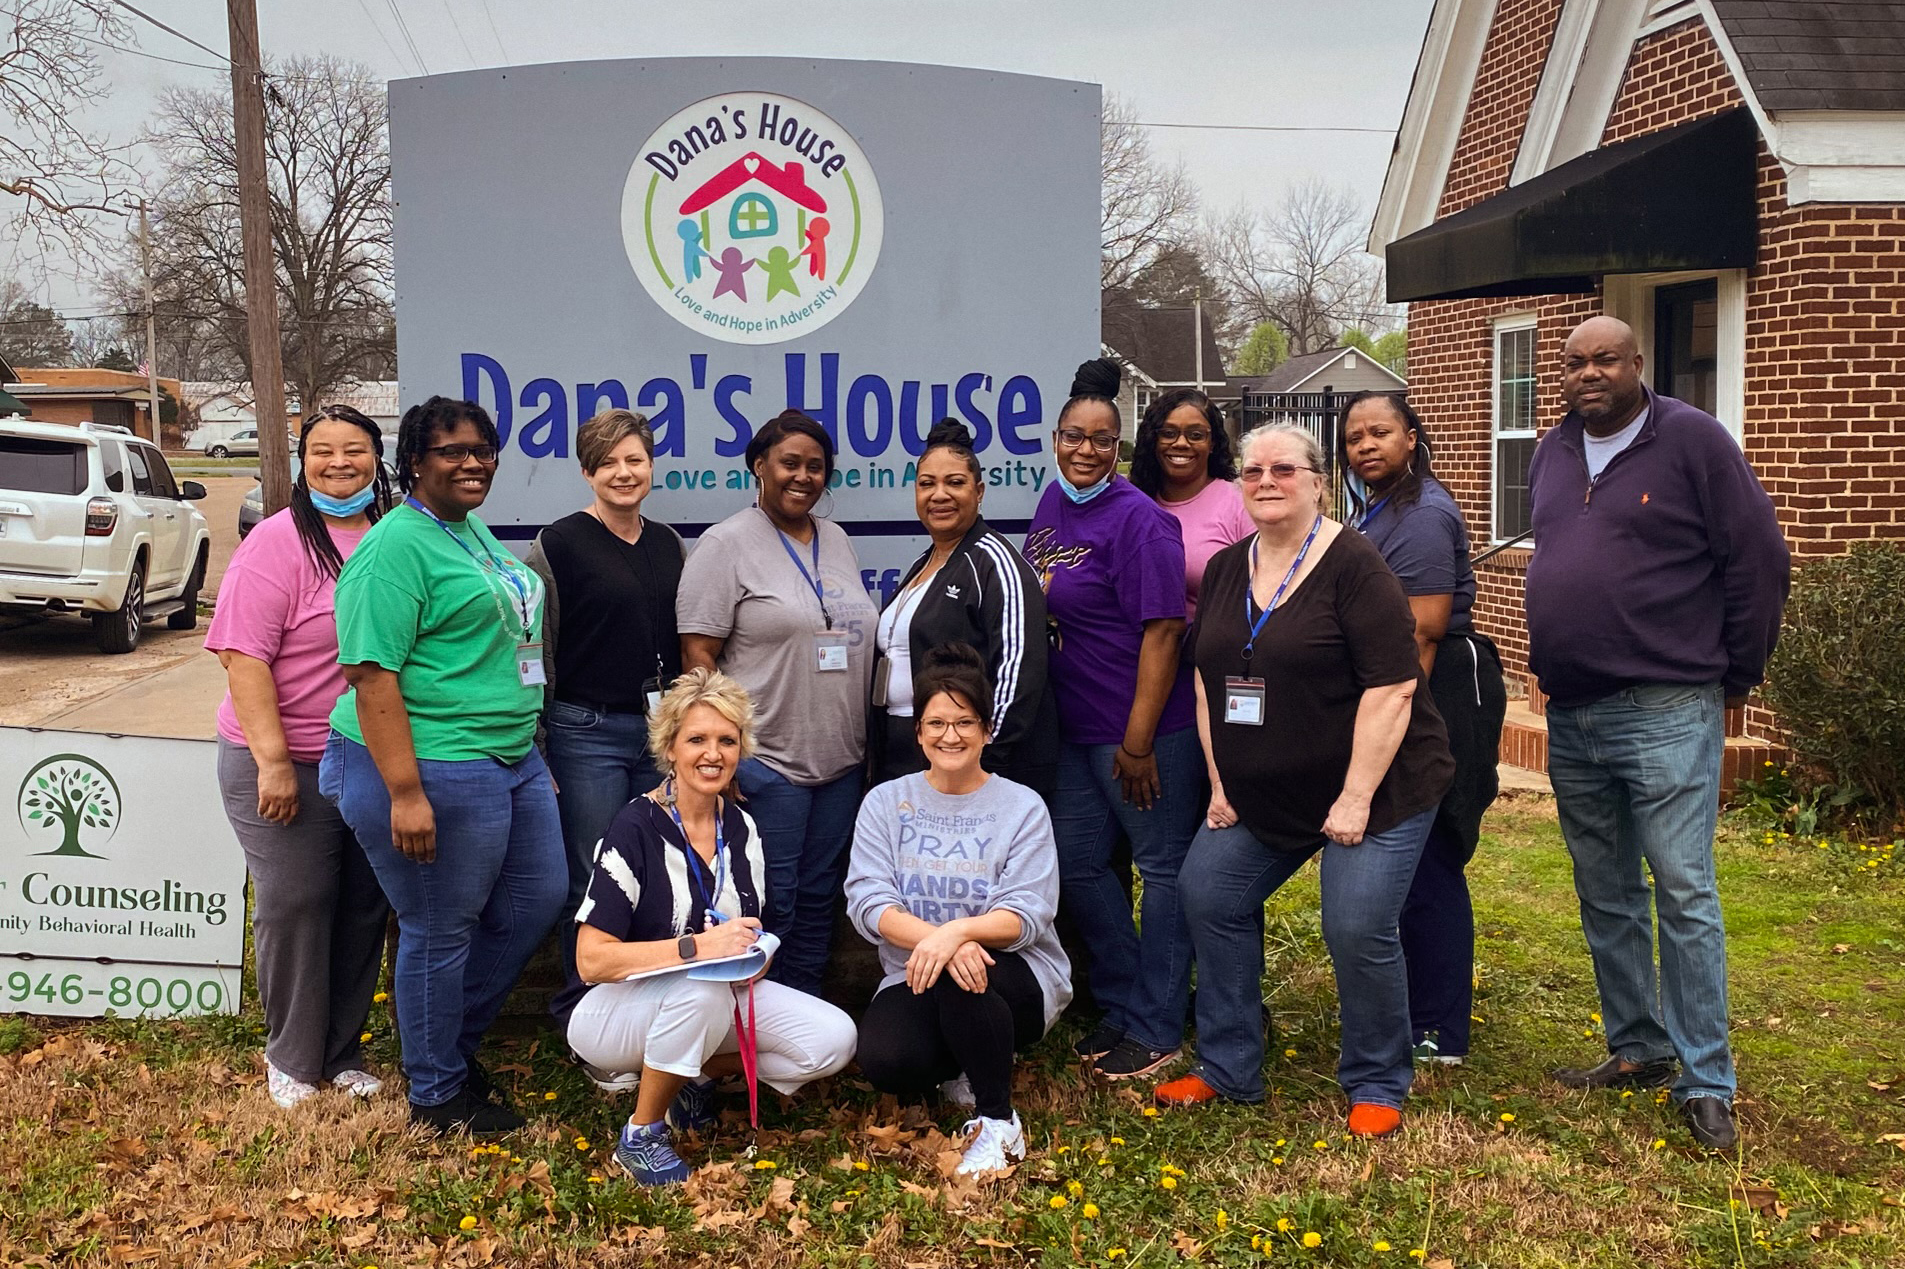 In collaboration with Arkansas FCT, we contributed to several community centers, including Dana’s House and Ouachita Children’s Center, during their National Day of Giving. Our involvement underscores a shared commitment to enriching local communities and supporting organizations dedicated to making a tangible difference.